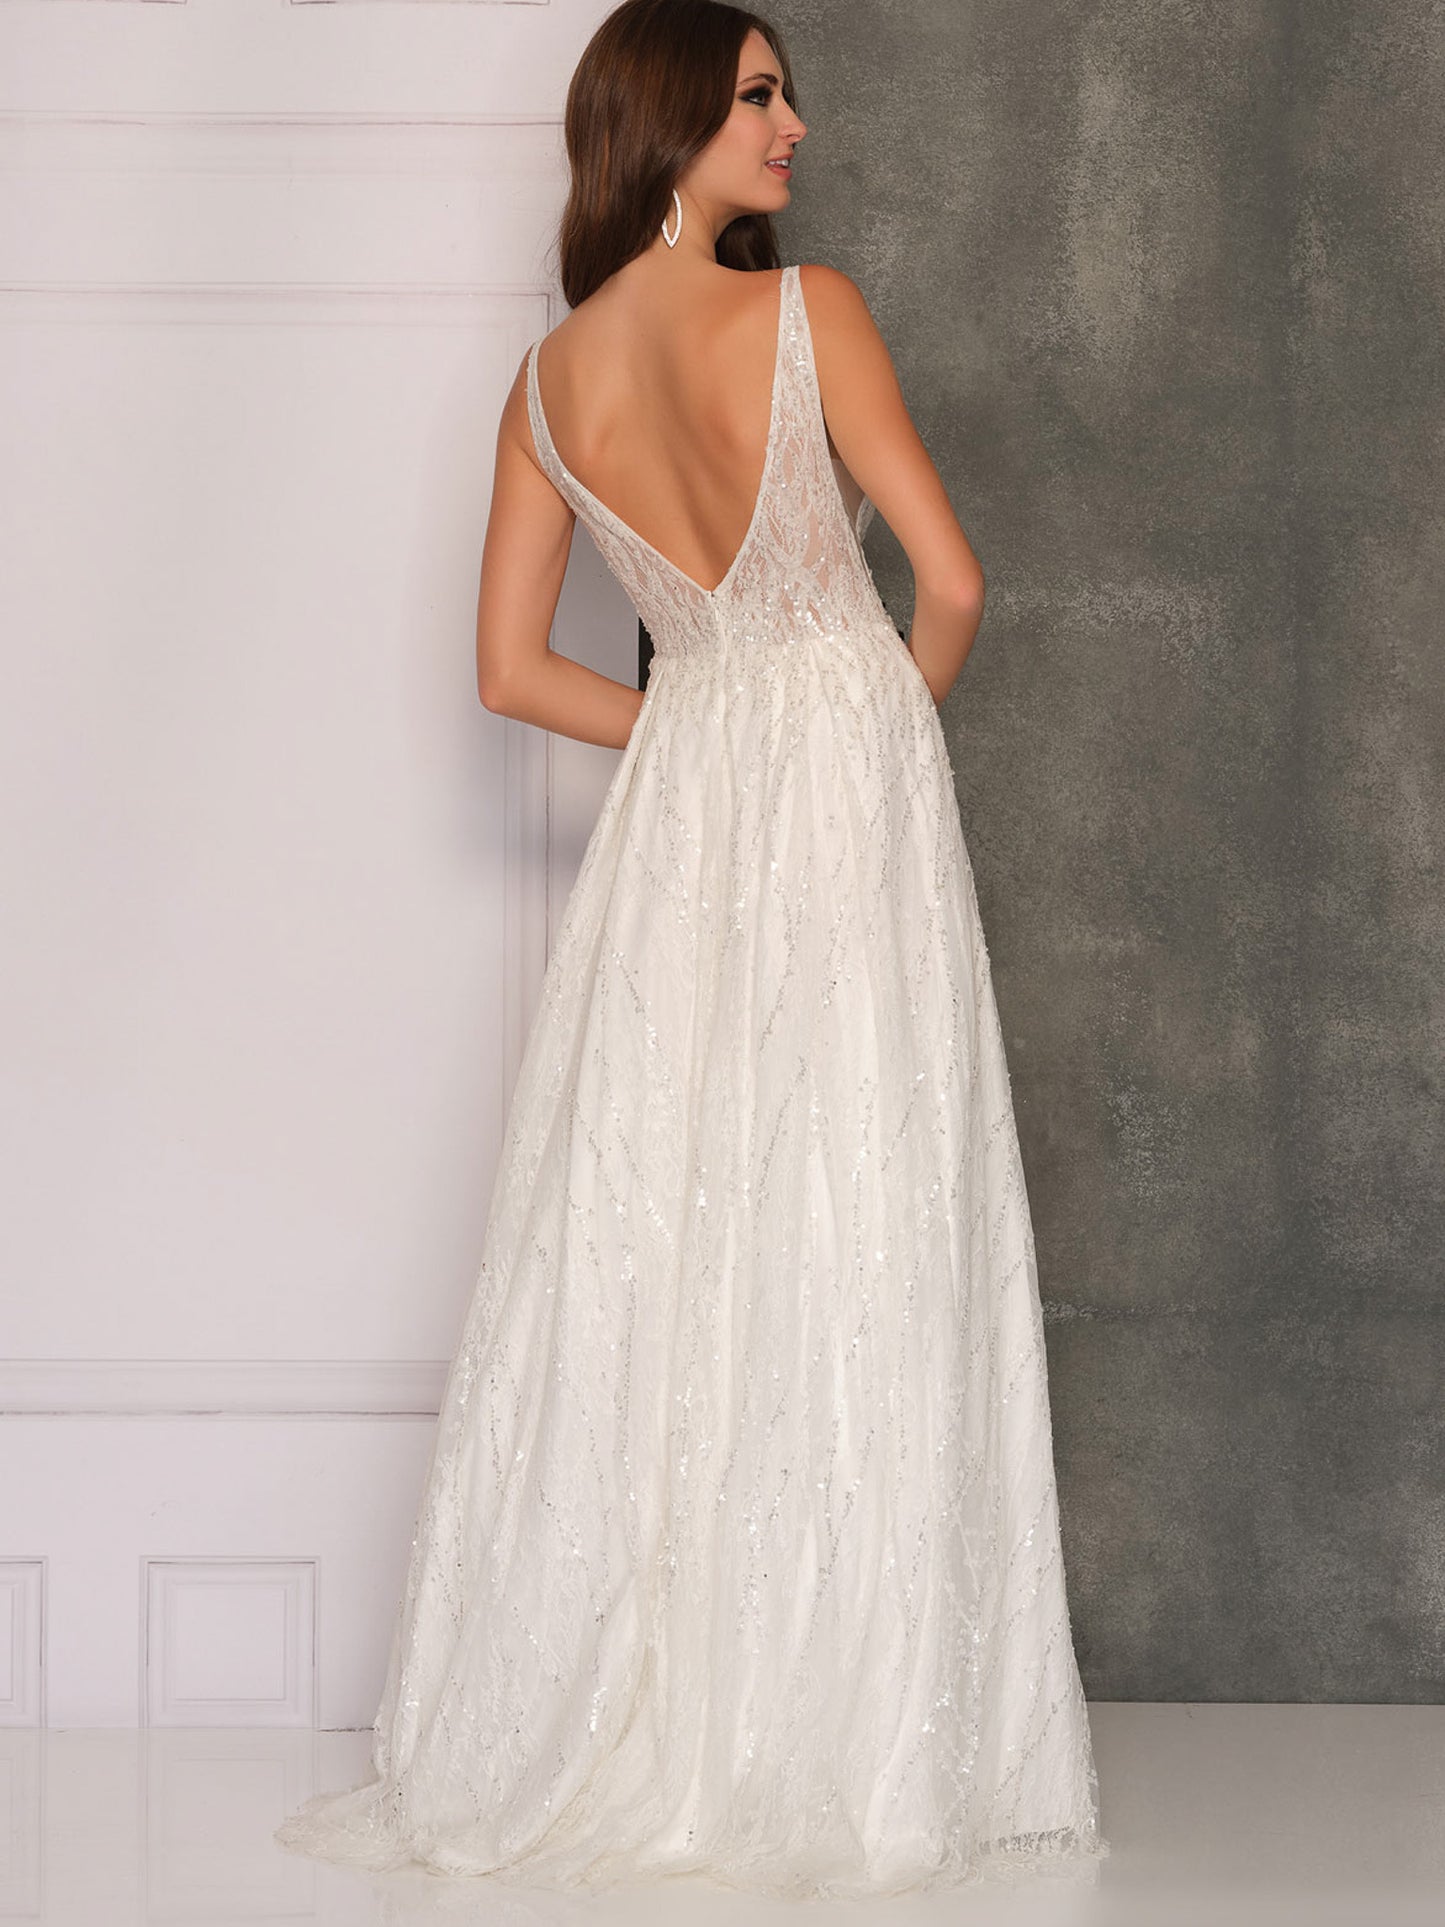 STRUCTURED TOP LOW BACK A-LINE WEDDING GOWN